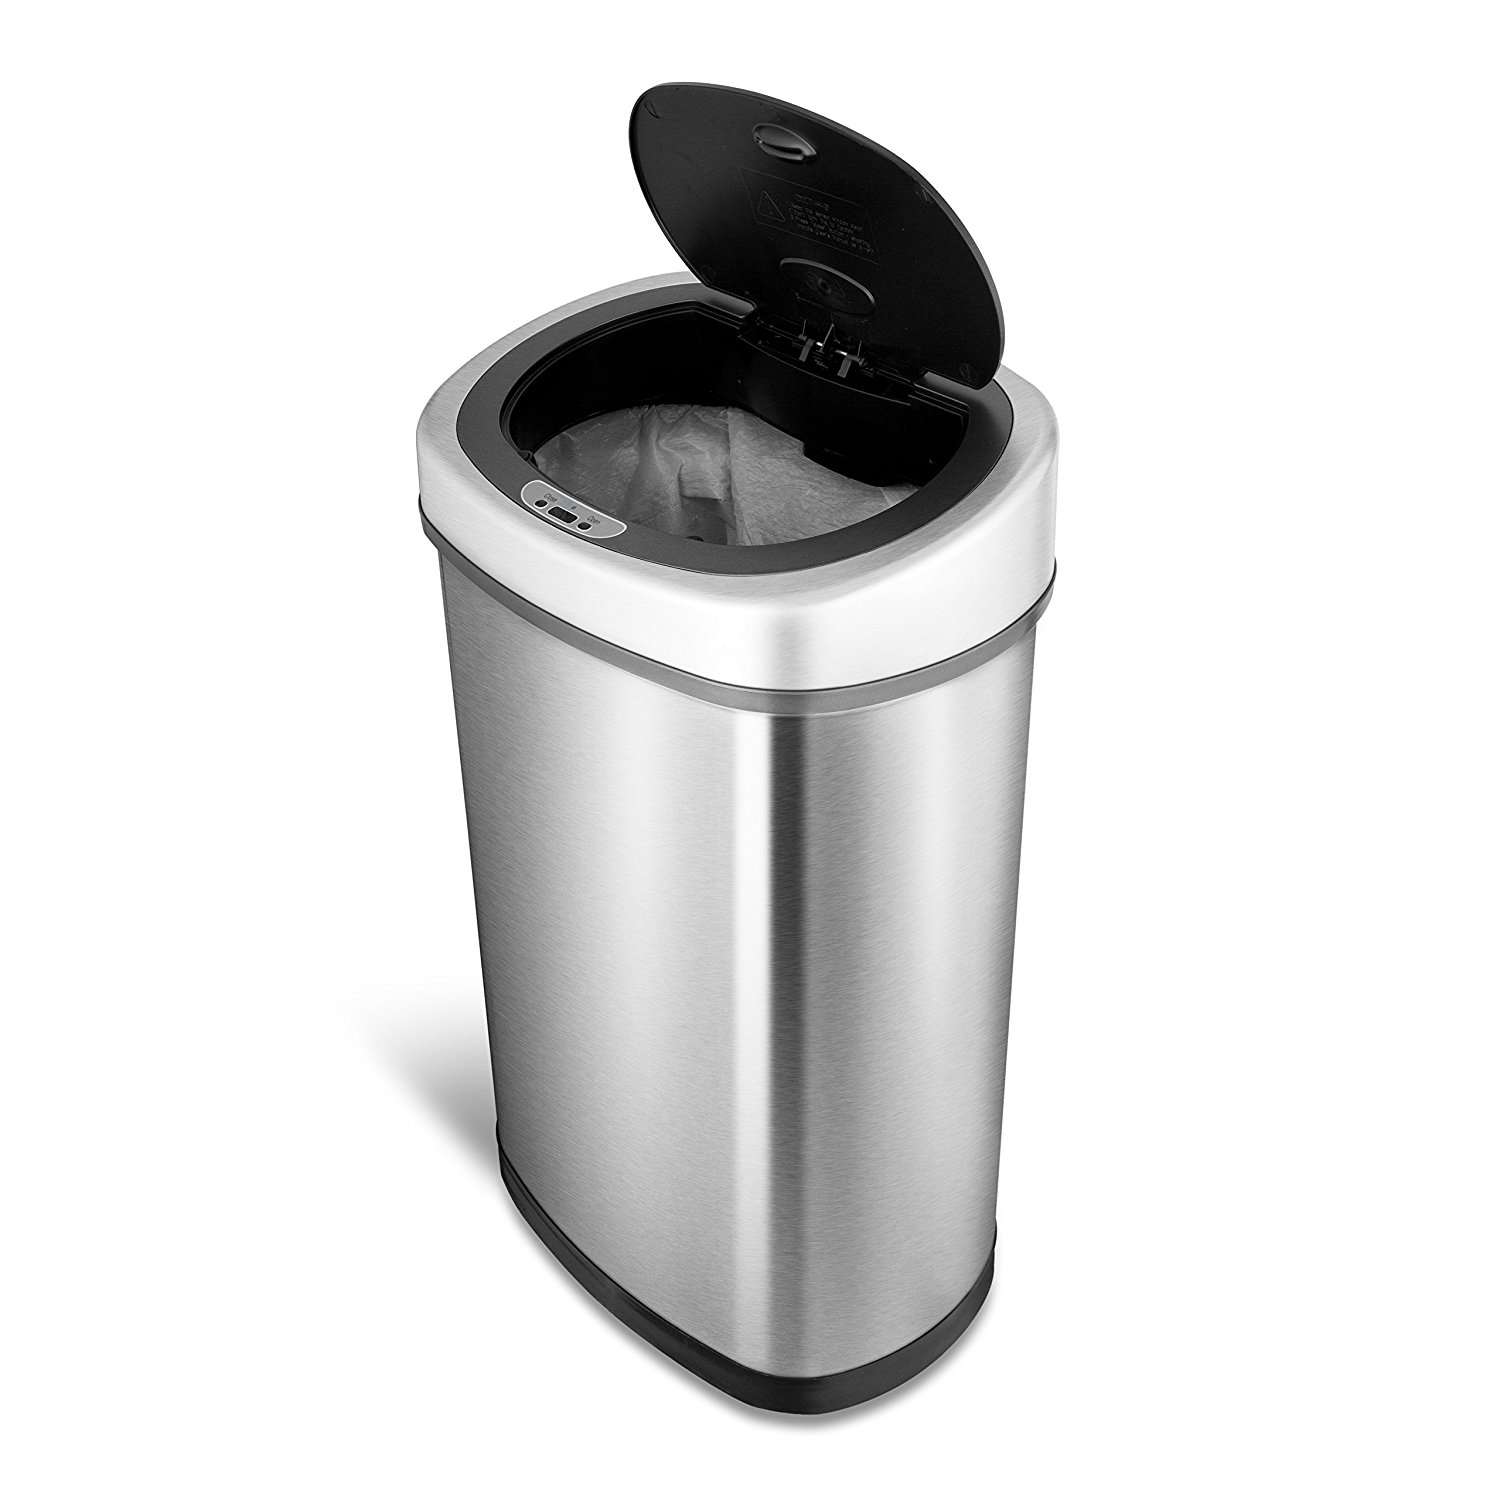 NINESTARS DZT-50-9 The Original Touchless Automatic Motion Sensor Trash Can, 13.2 Gal. / 50 L., Stainless Steel